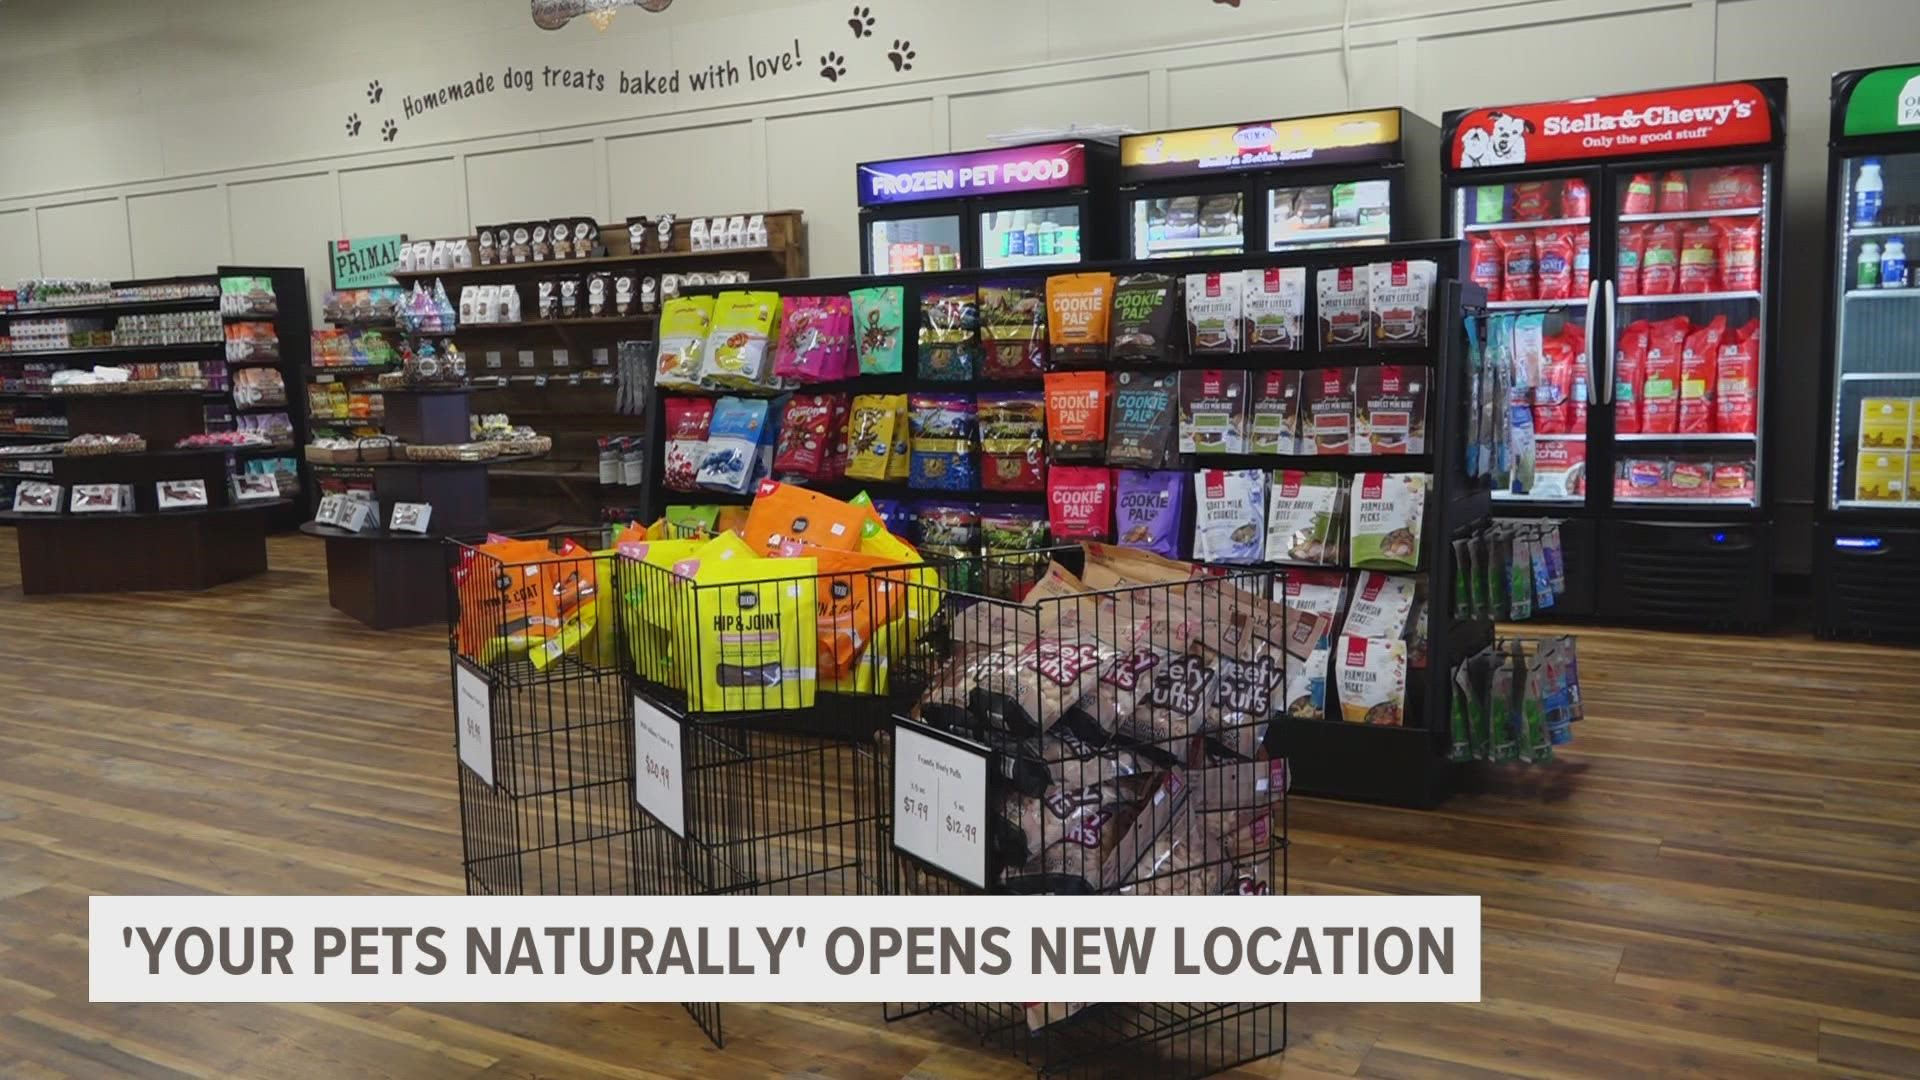 The business is described as a holistic pet supply store with a full line of health aids, high-quality food and wellness products.